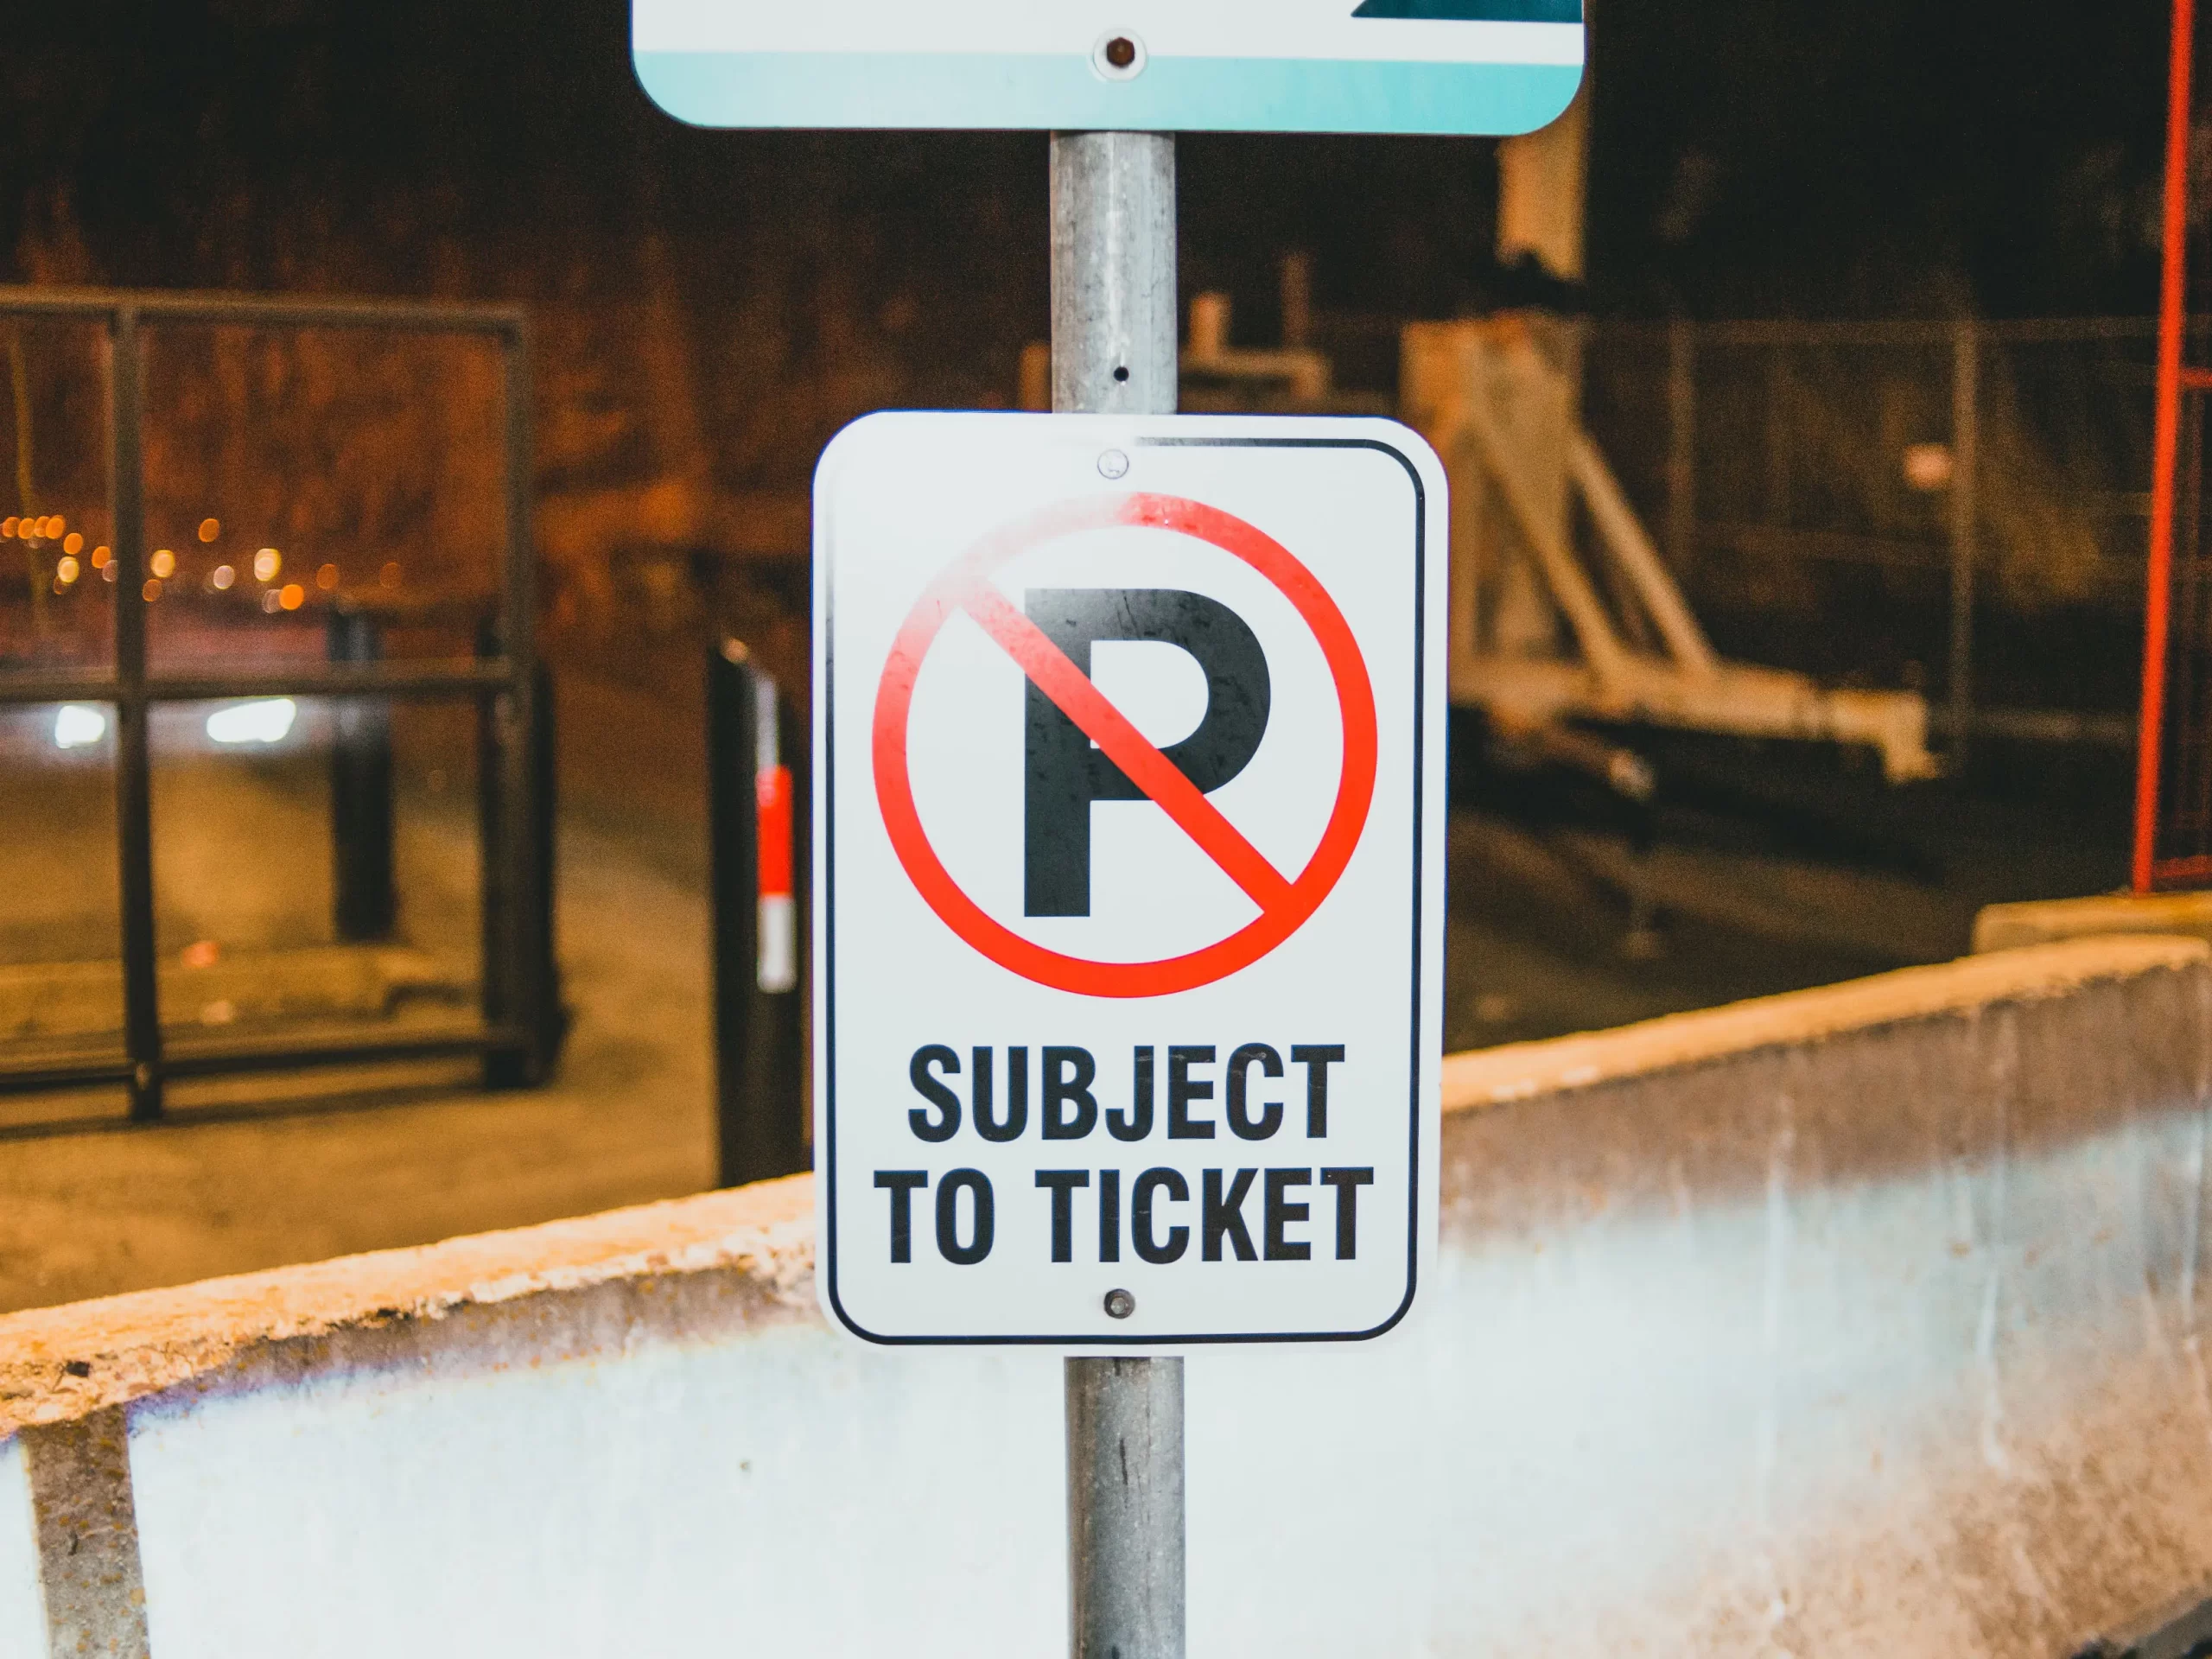 A no parking sign that says "Subject to ticket"